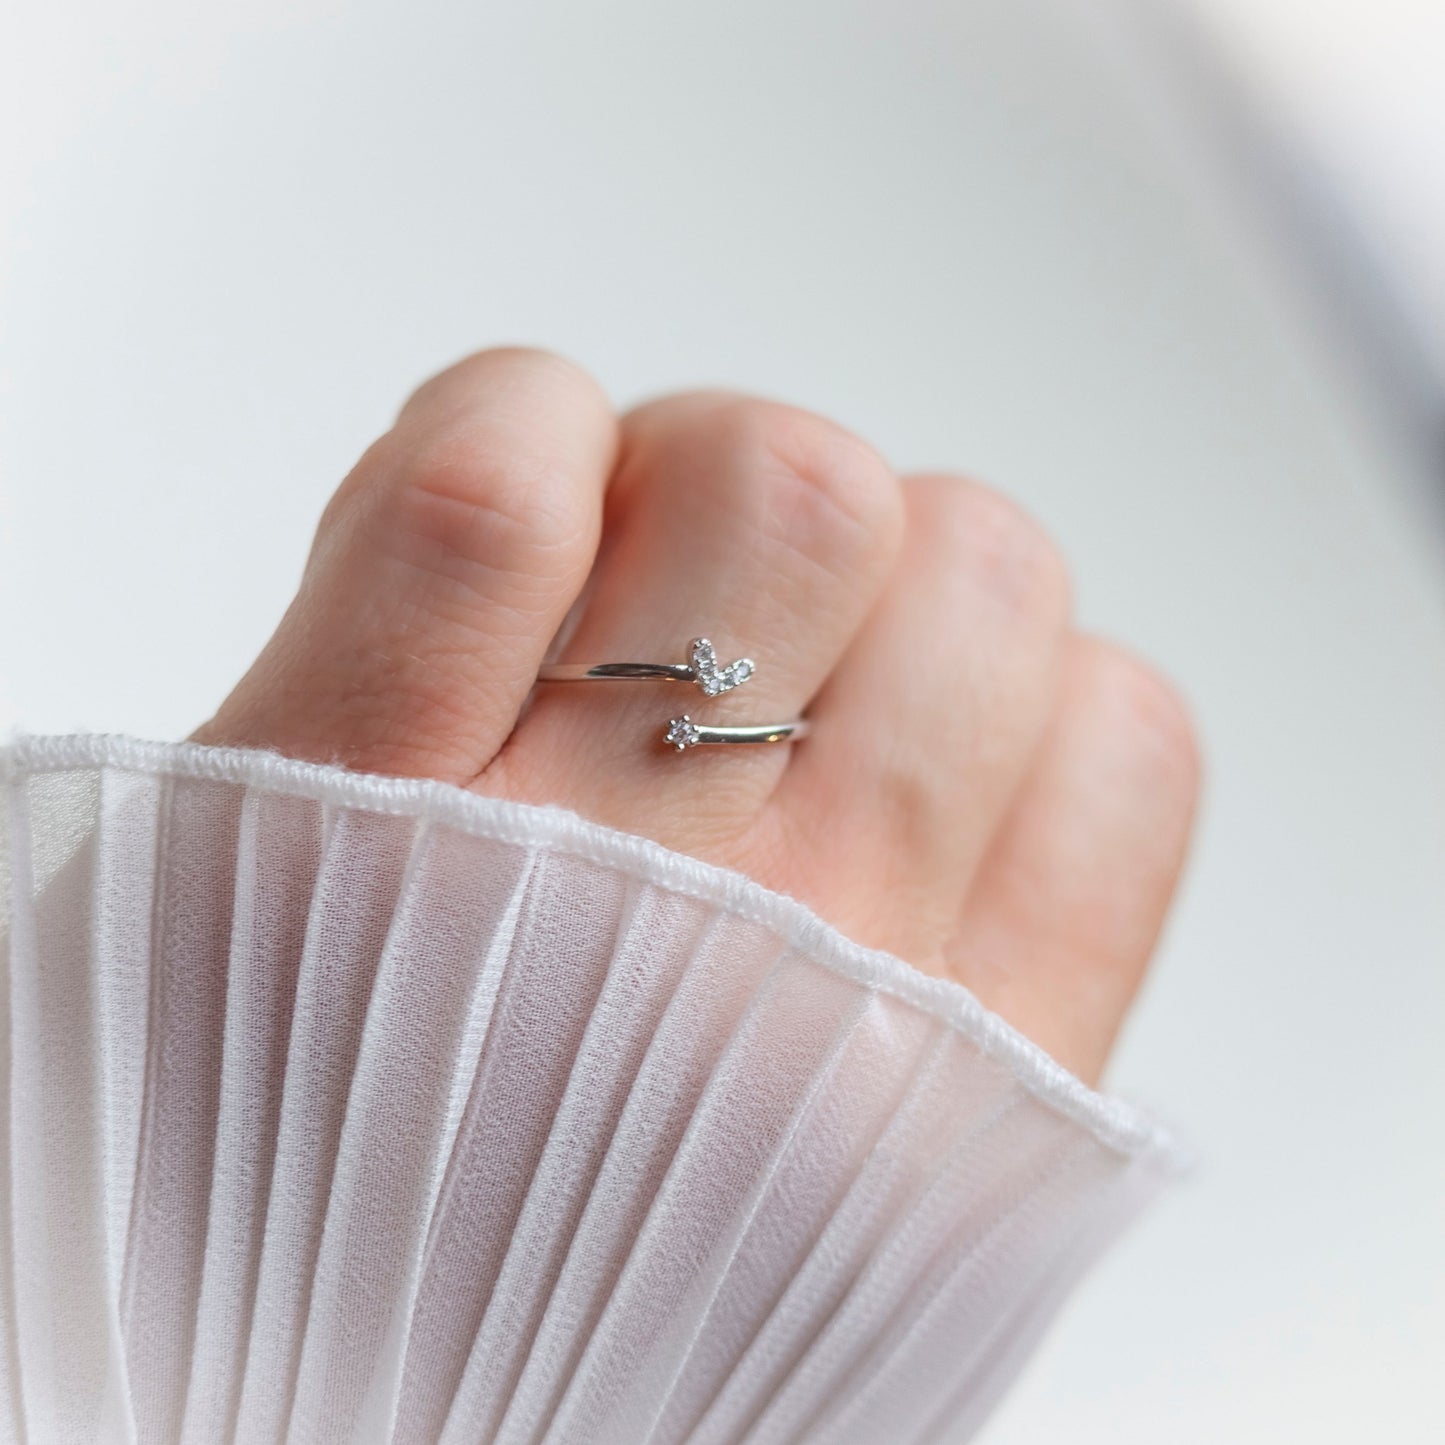 Check Stylish Silver CZ Ring on woman's finger view